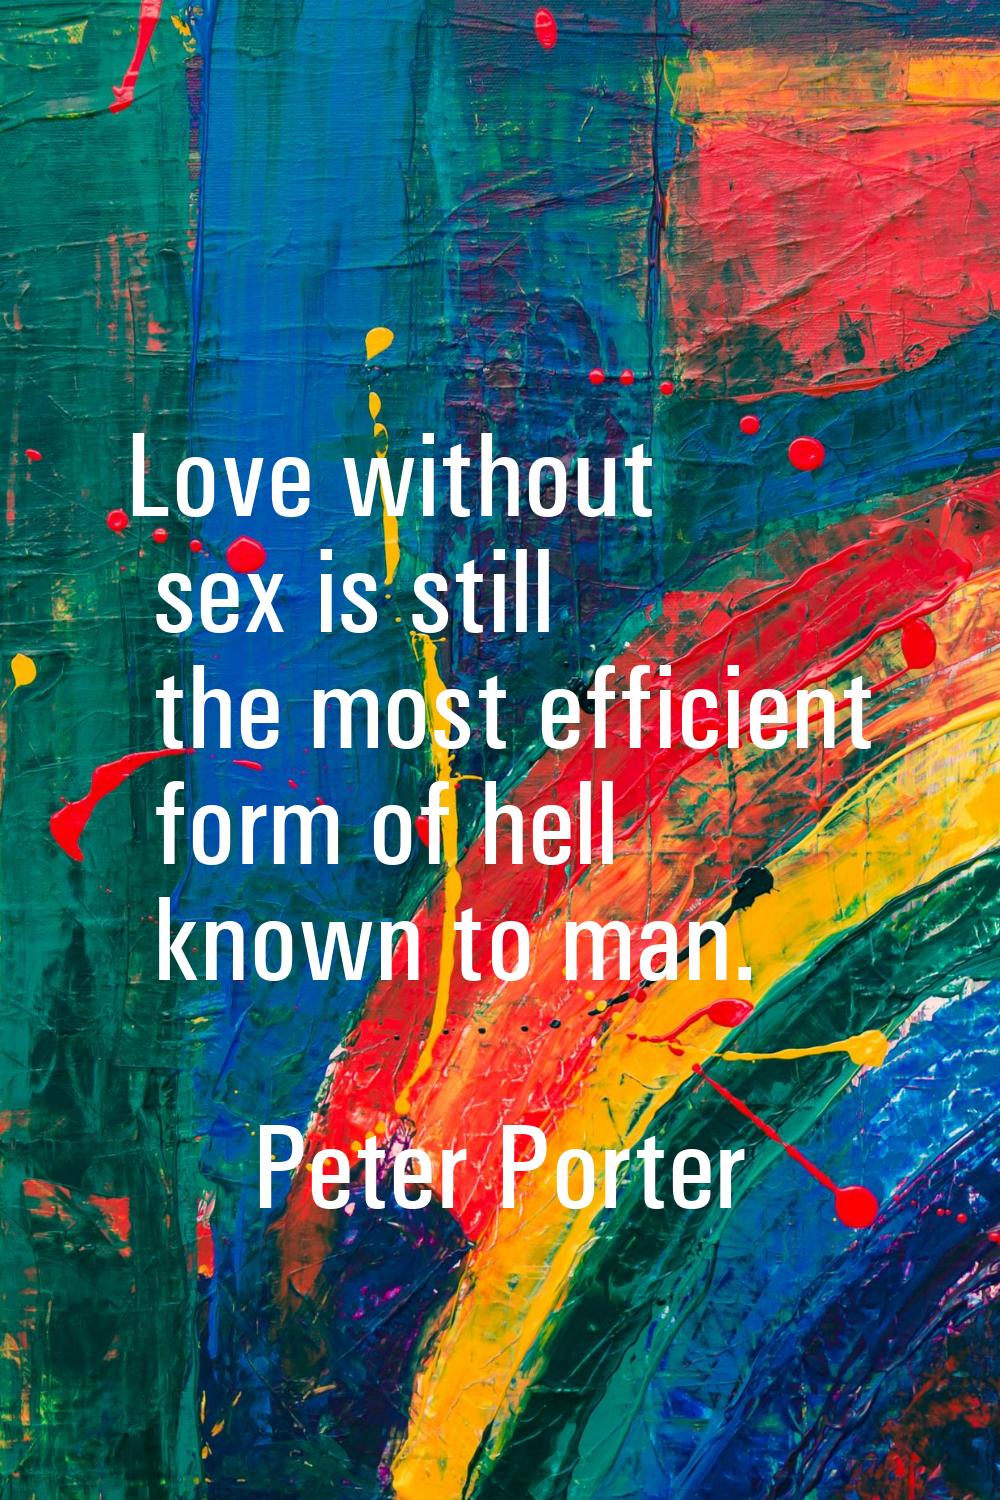 Love without sex is still the most efficient form of hell known to man.